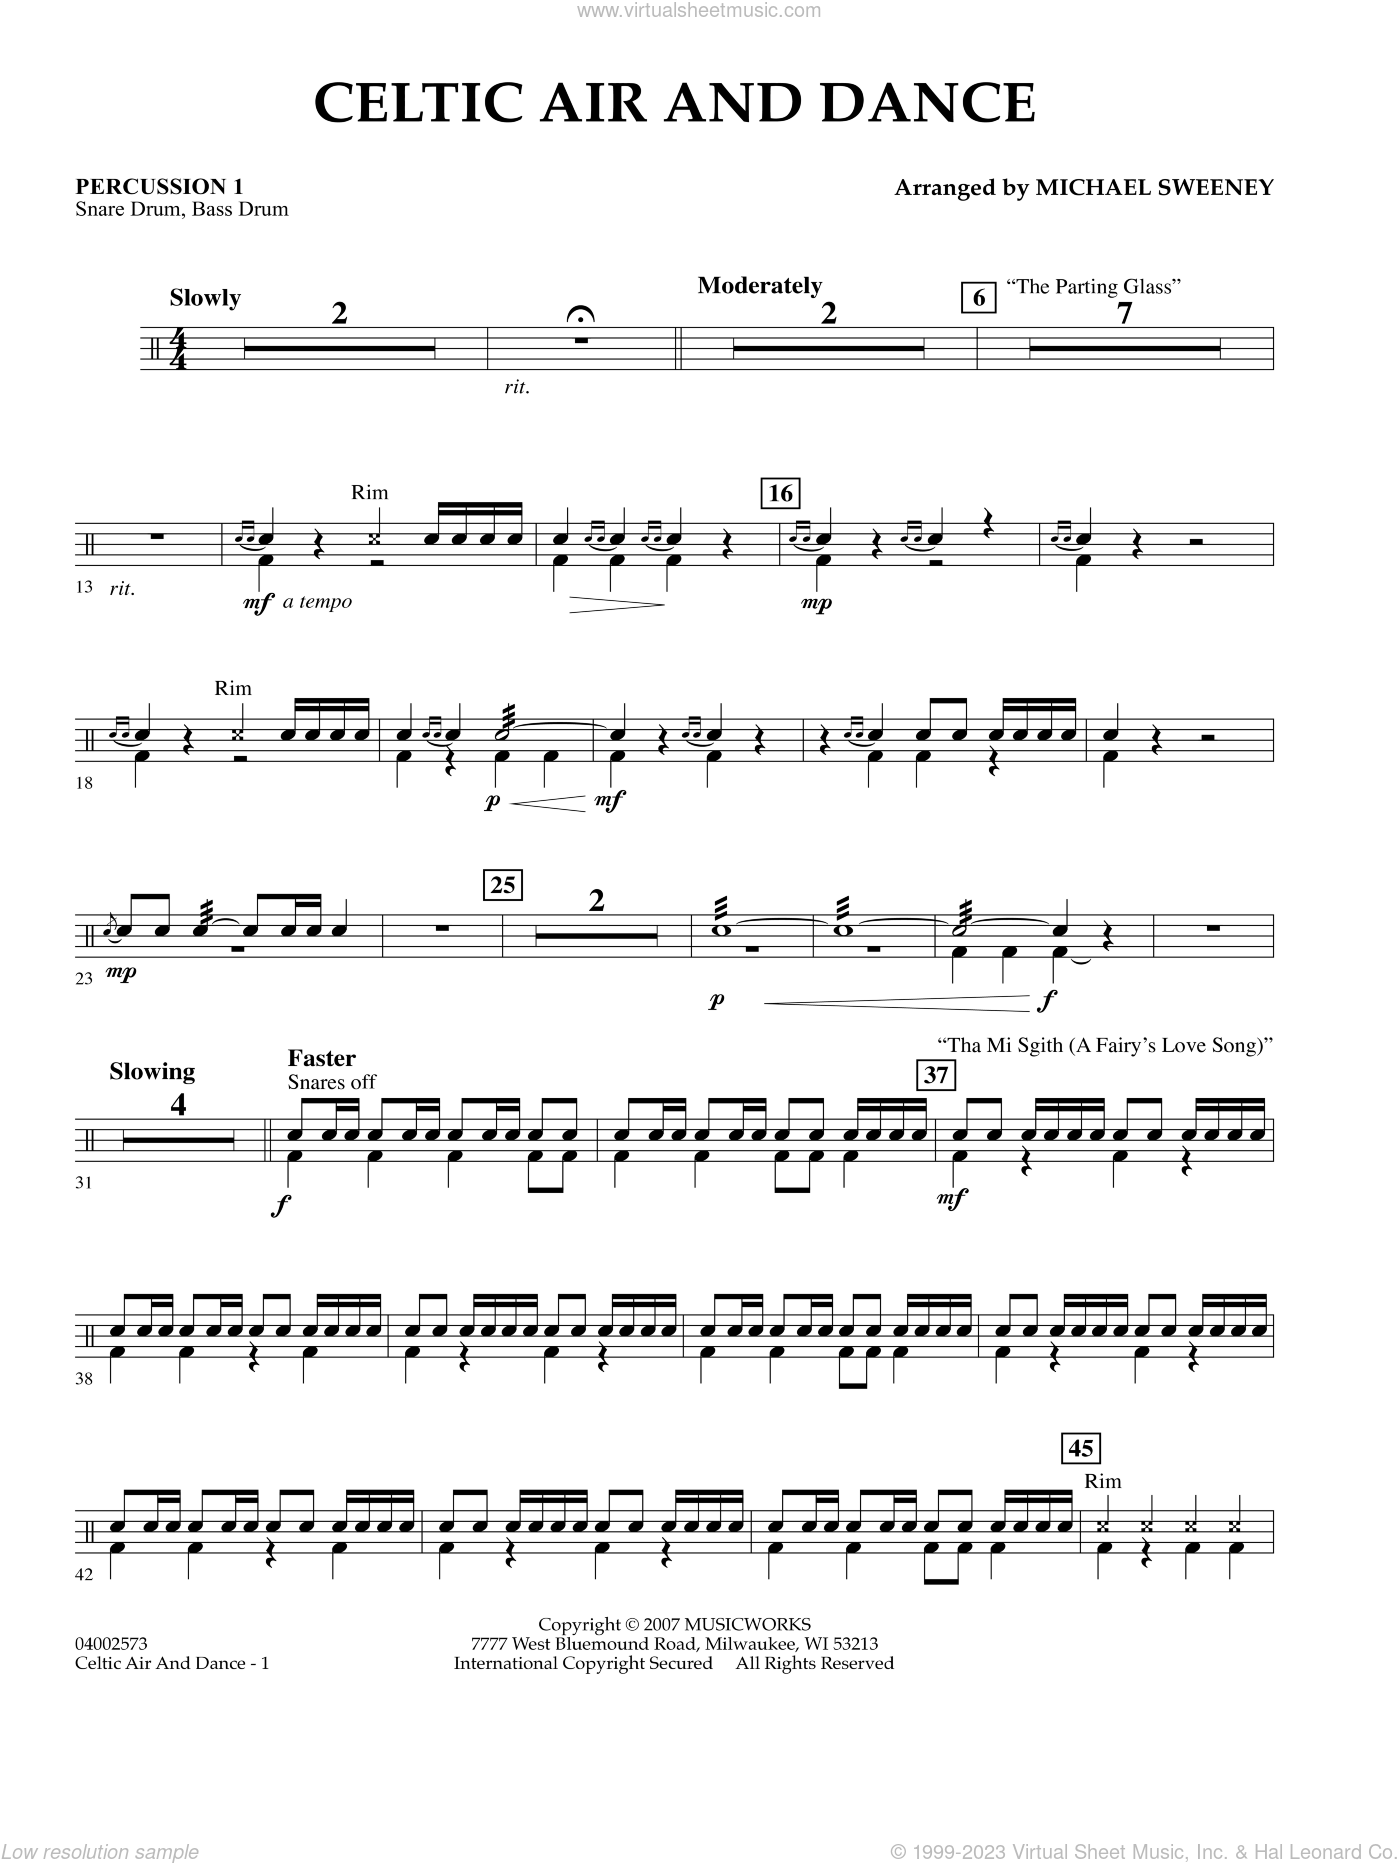 Celtic Air and Dance sheet music (from Celtic Air and Dance (No. 1